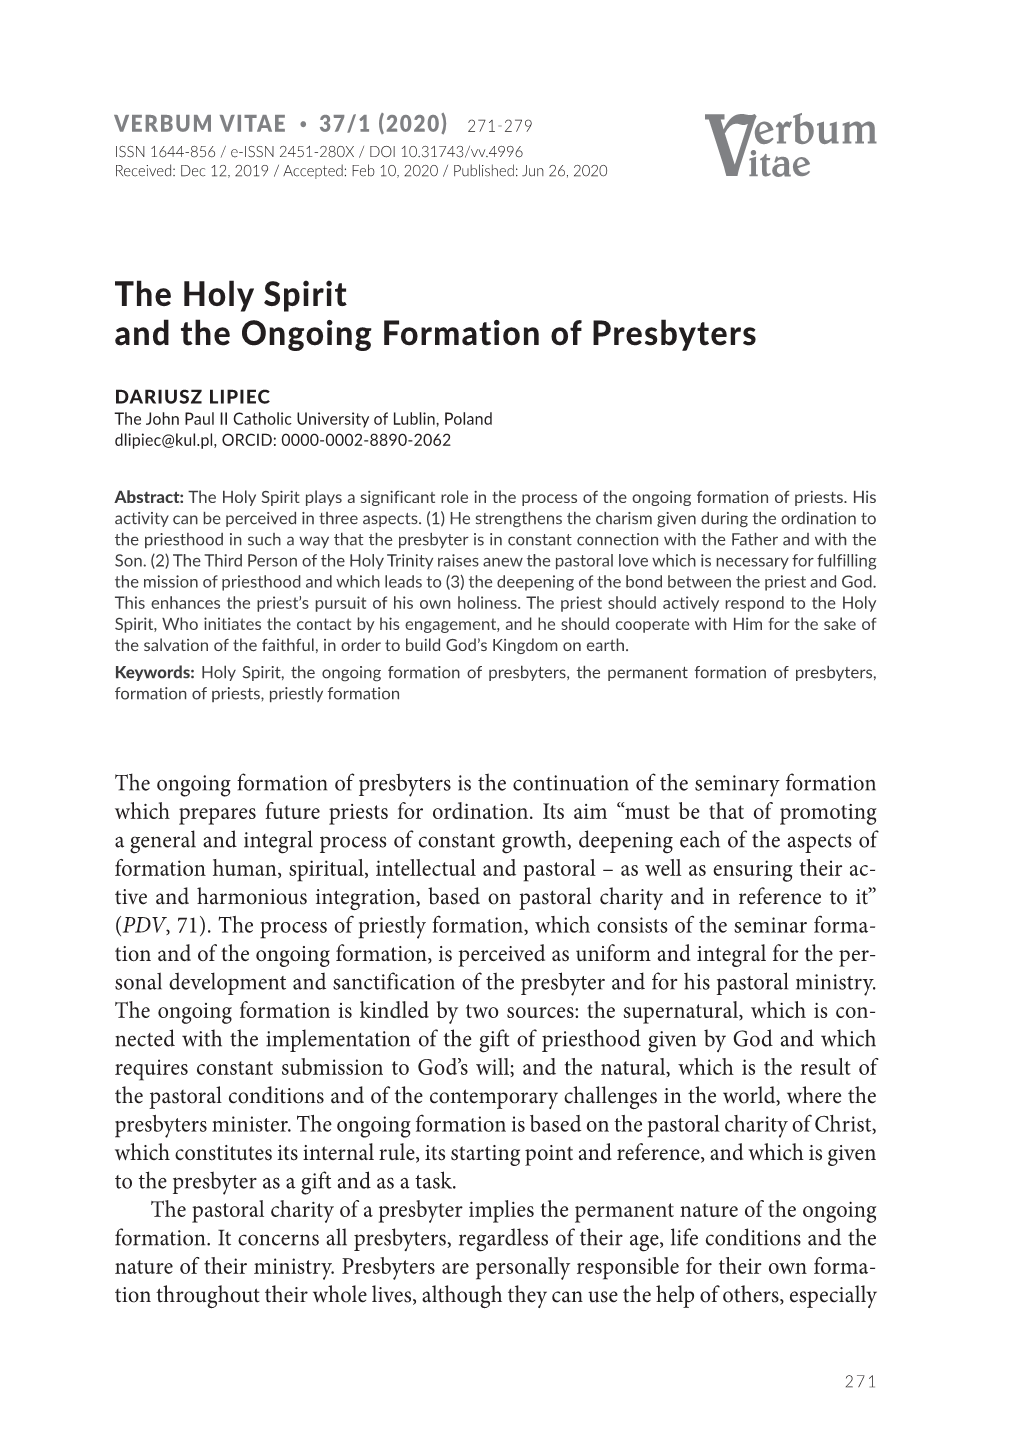 The Holy Spirit and the Ongoing Formation of Presbyters